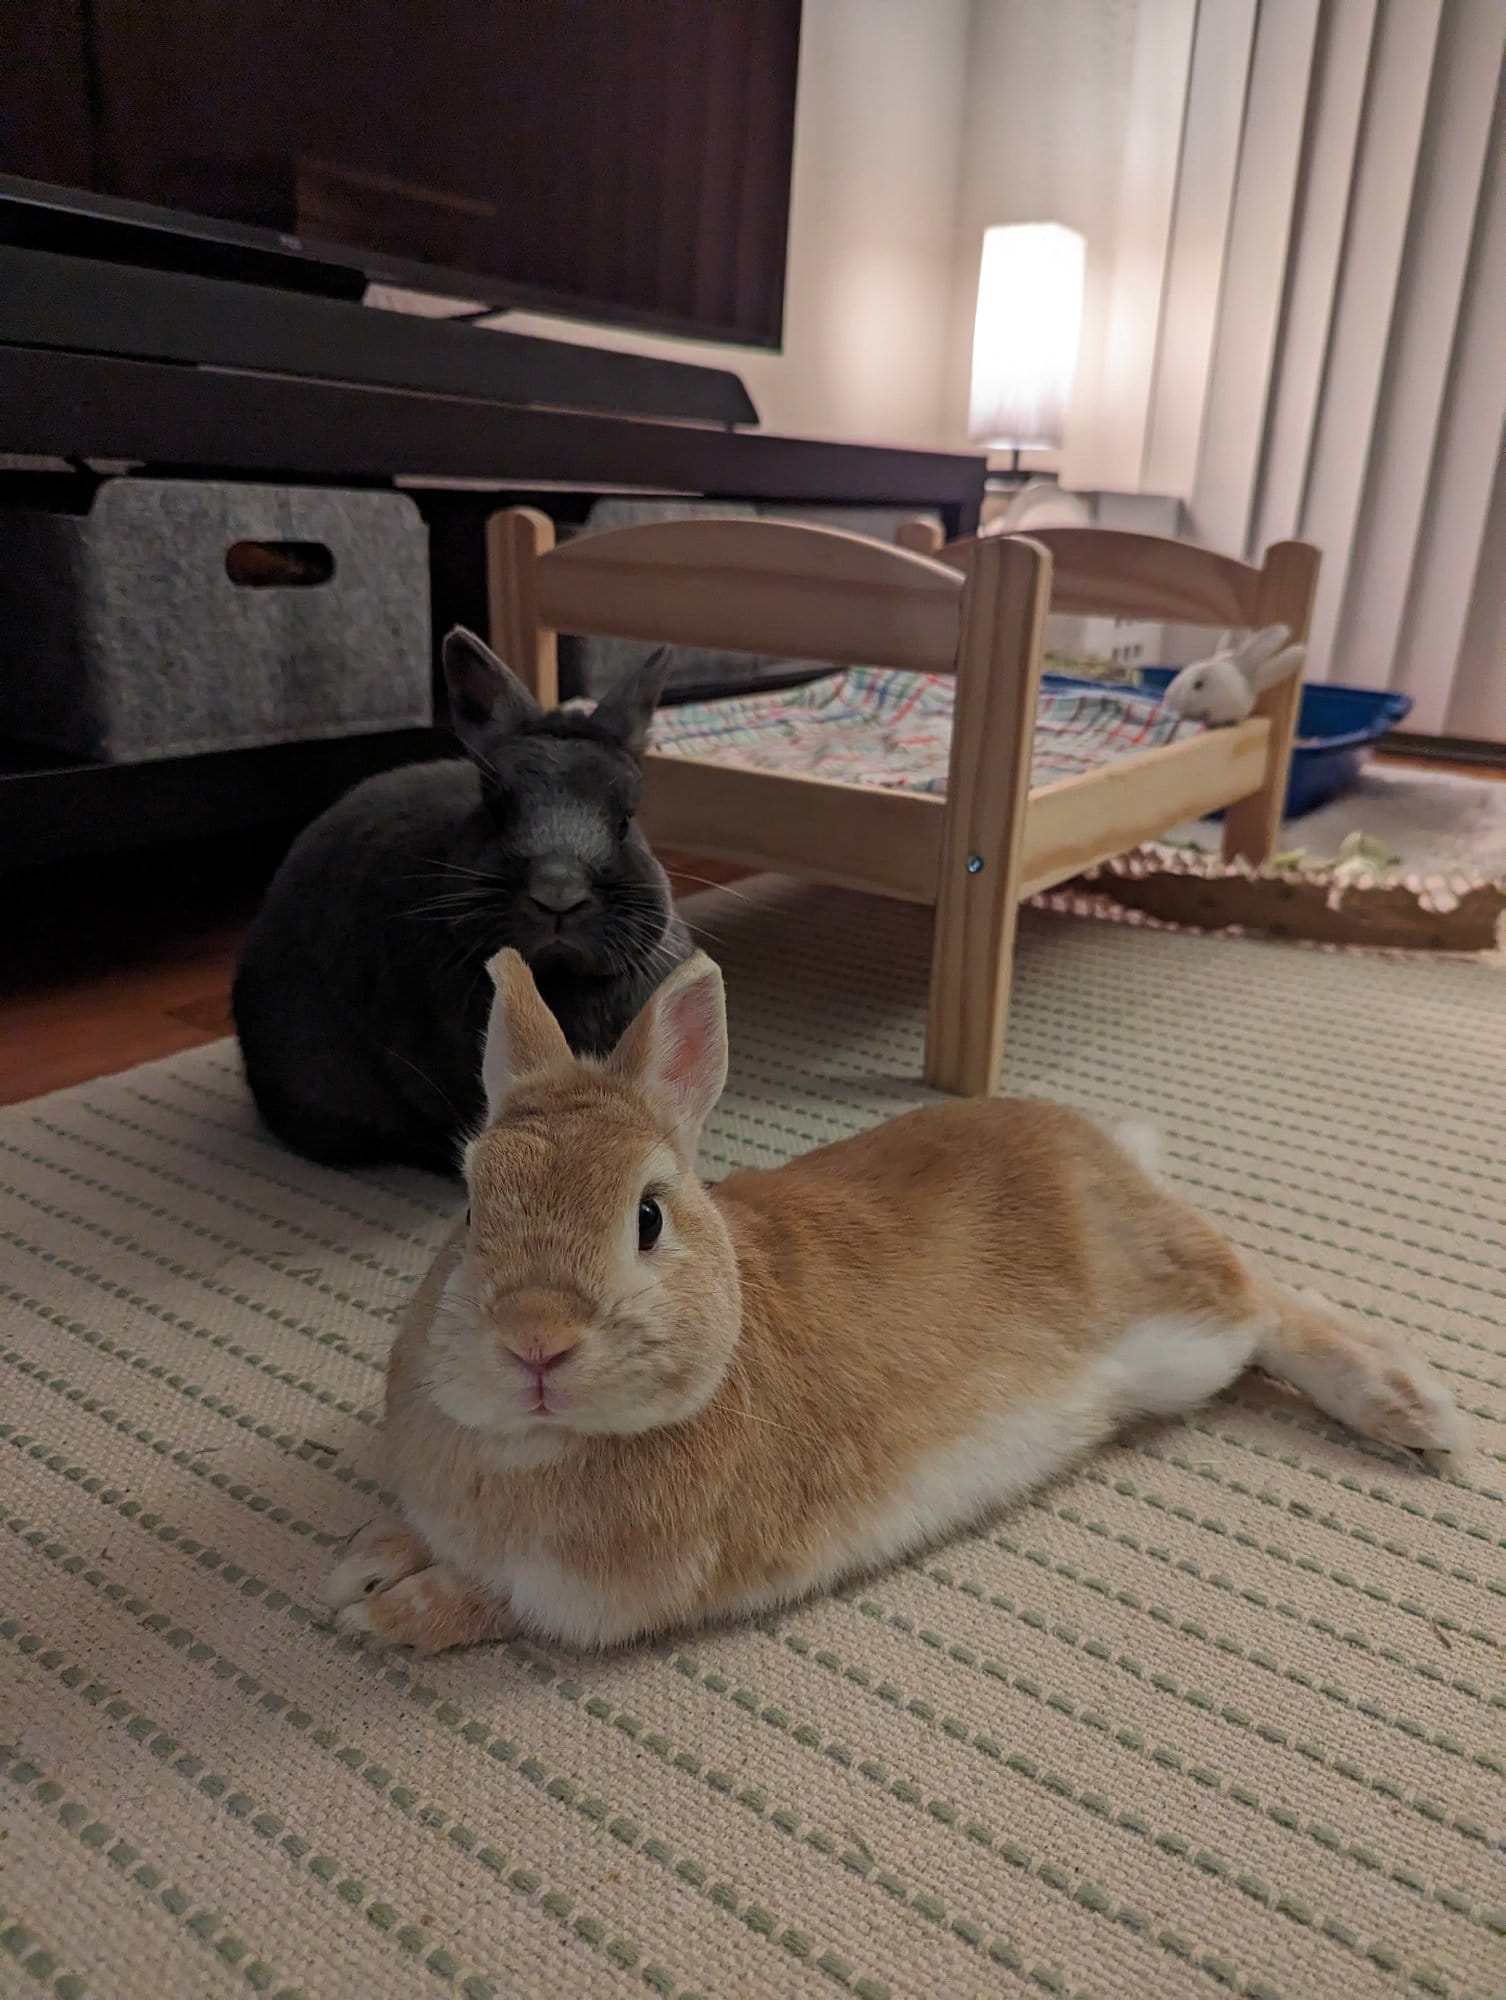 Two rabbits, one black and the other orange and white, resting on a carpeted floor with a wooden toy bed and a lamp in the background